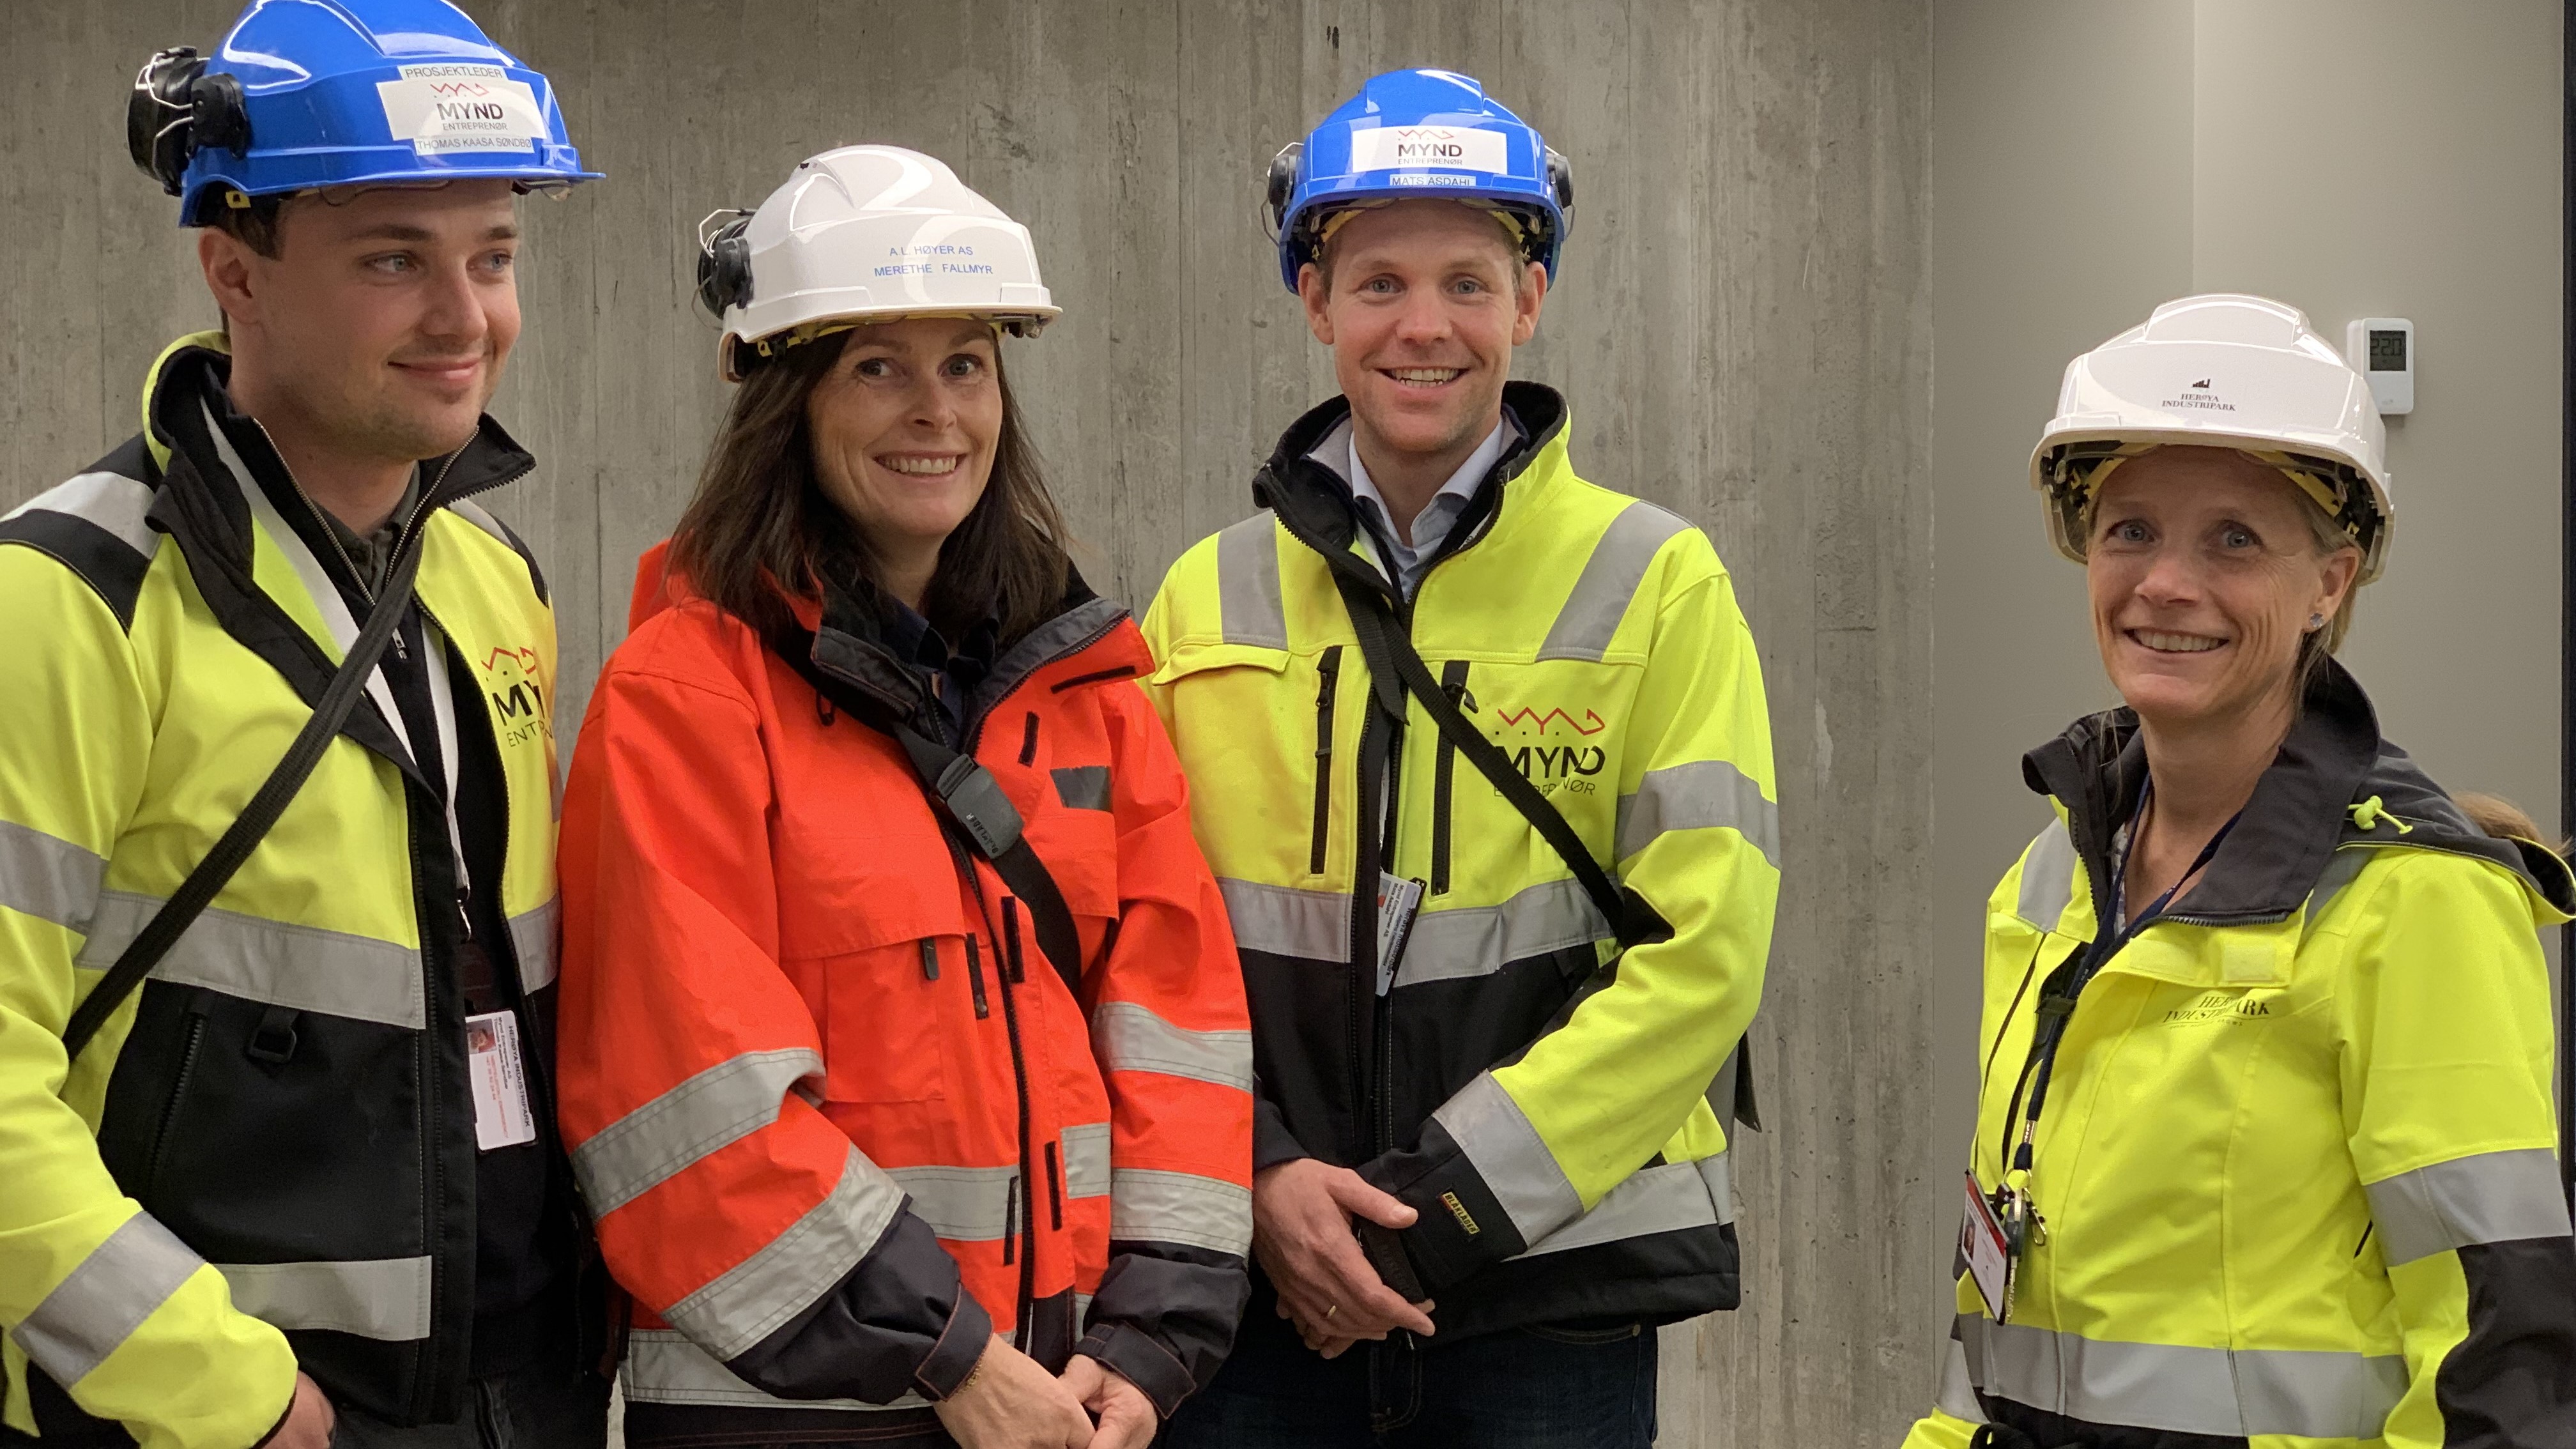 Four individuals in yellow and red work attire, blue and white helmets, posing, office environment, gray concrete in the background.